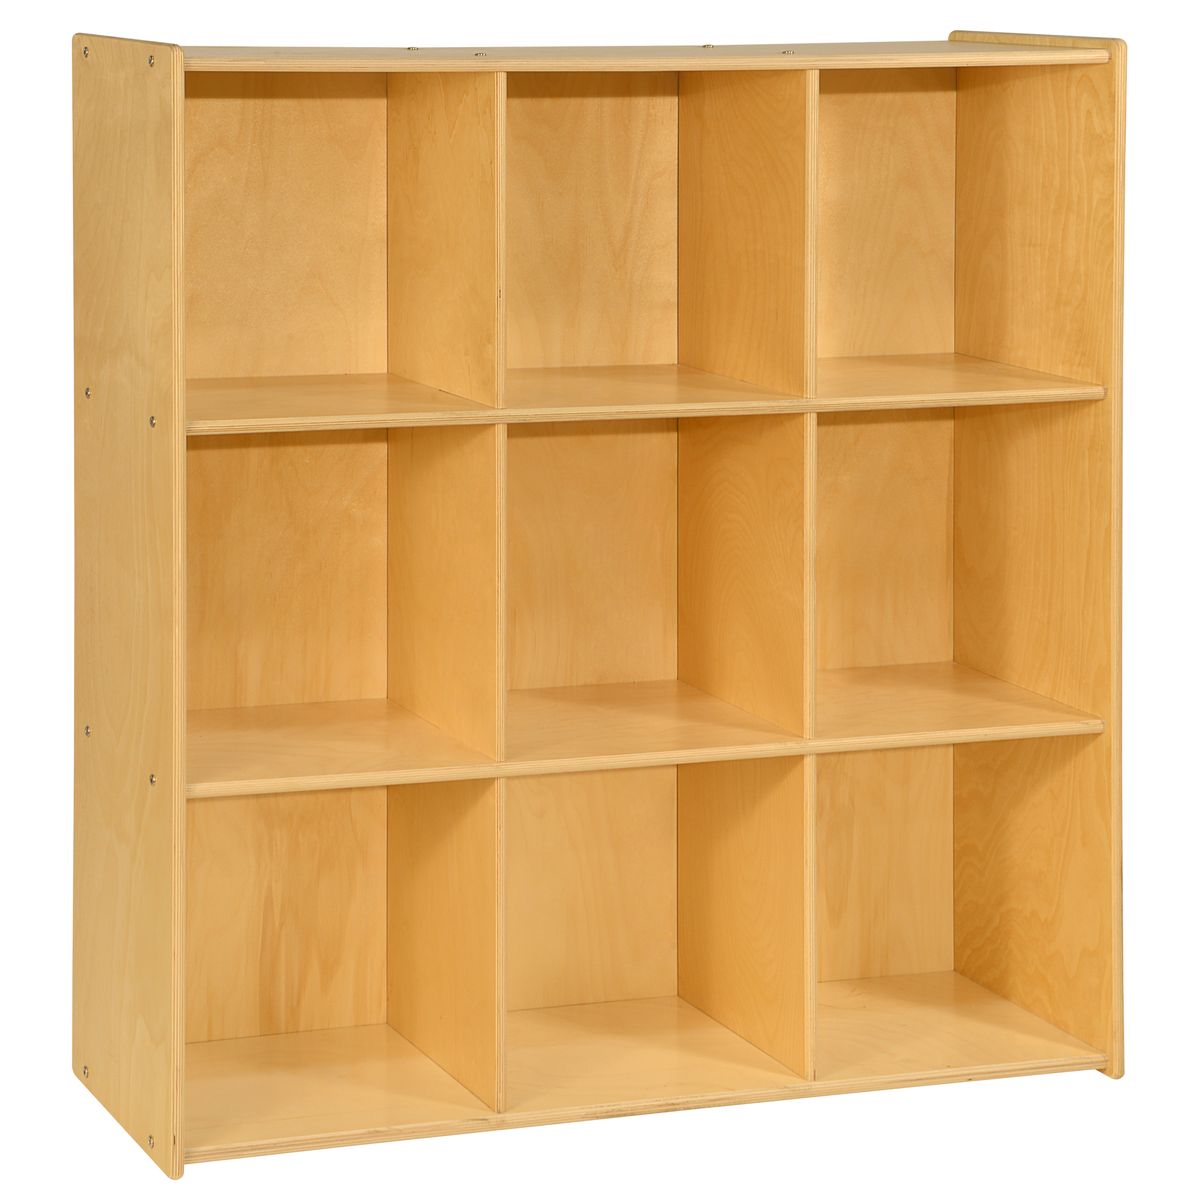 Picture of Contender C50900F Big Cubby Storage with 9 Cubbies - Assembled